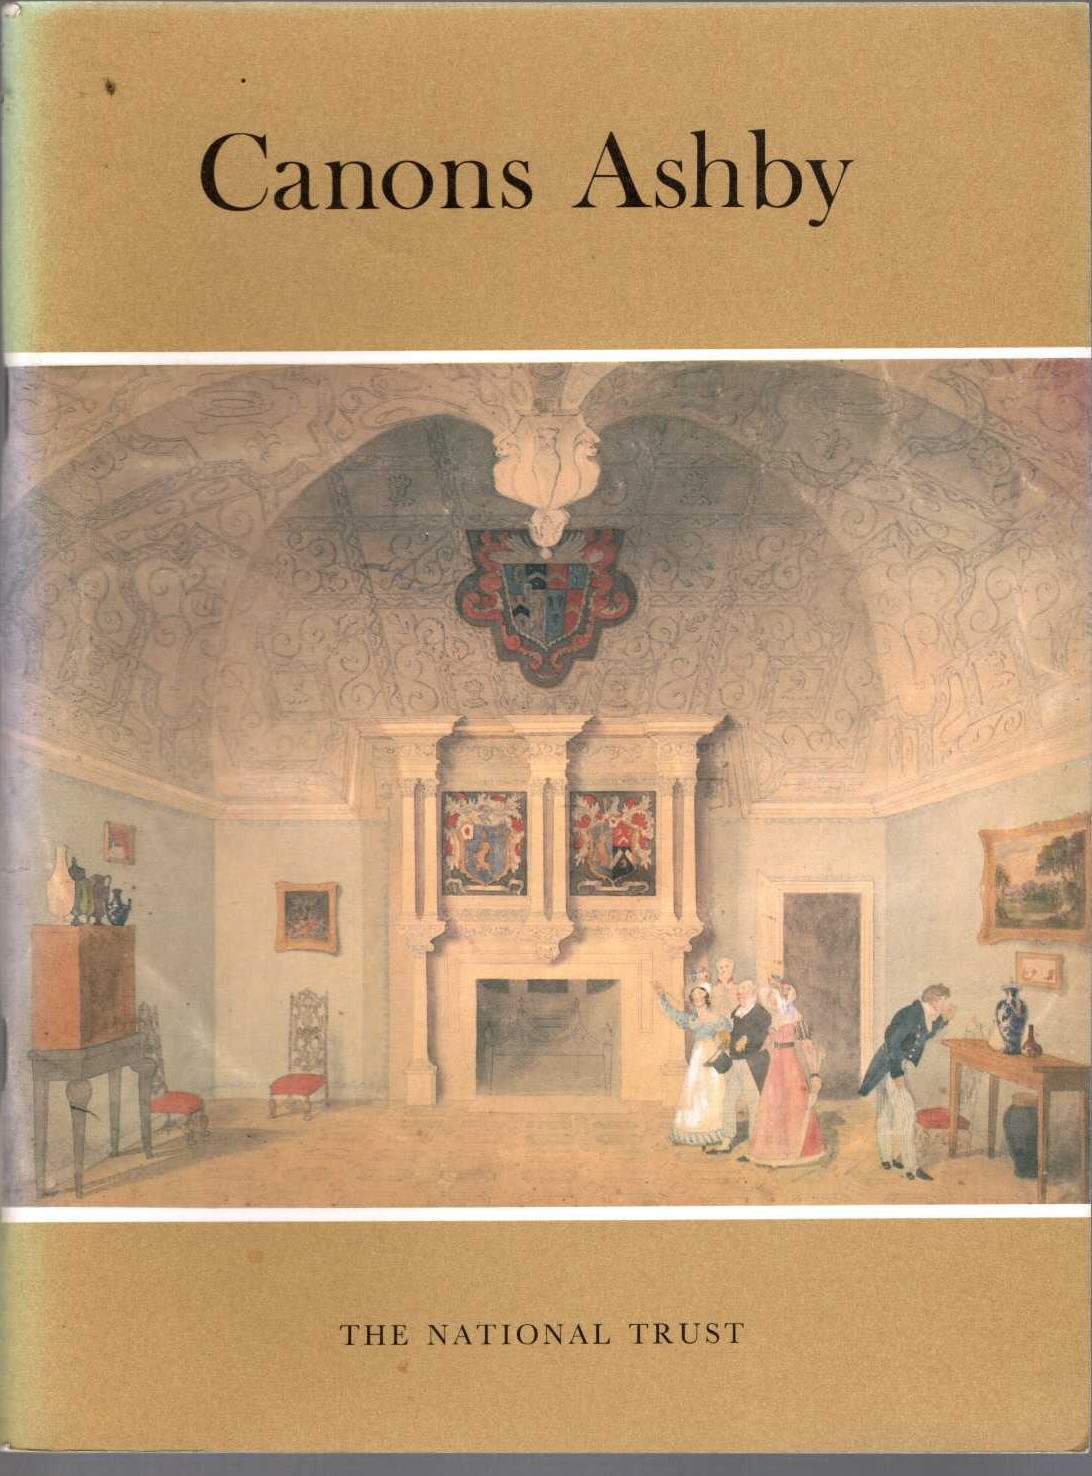 \ CANONS ASHBY by The National Trust front book cover image